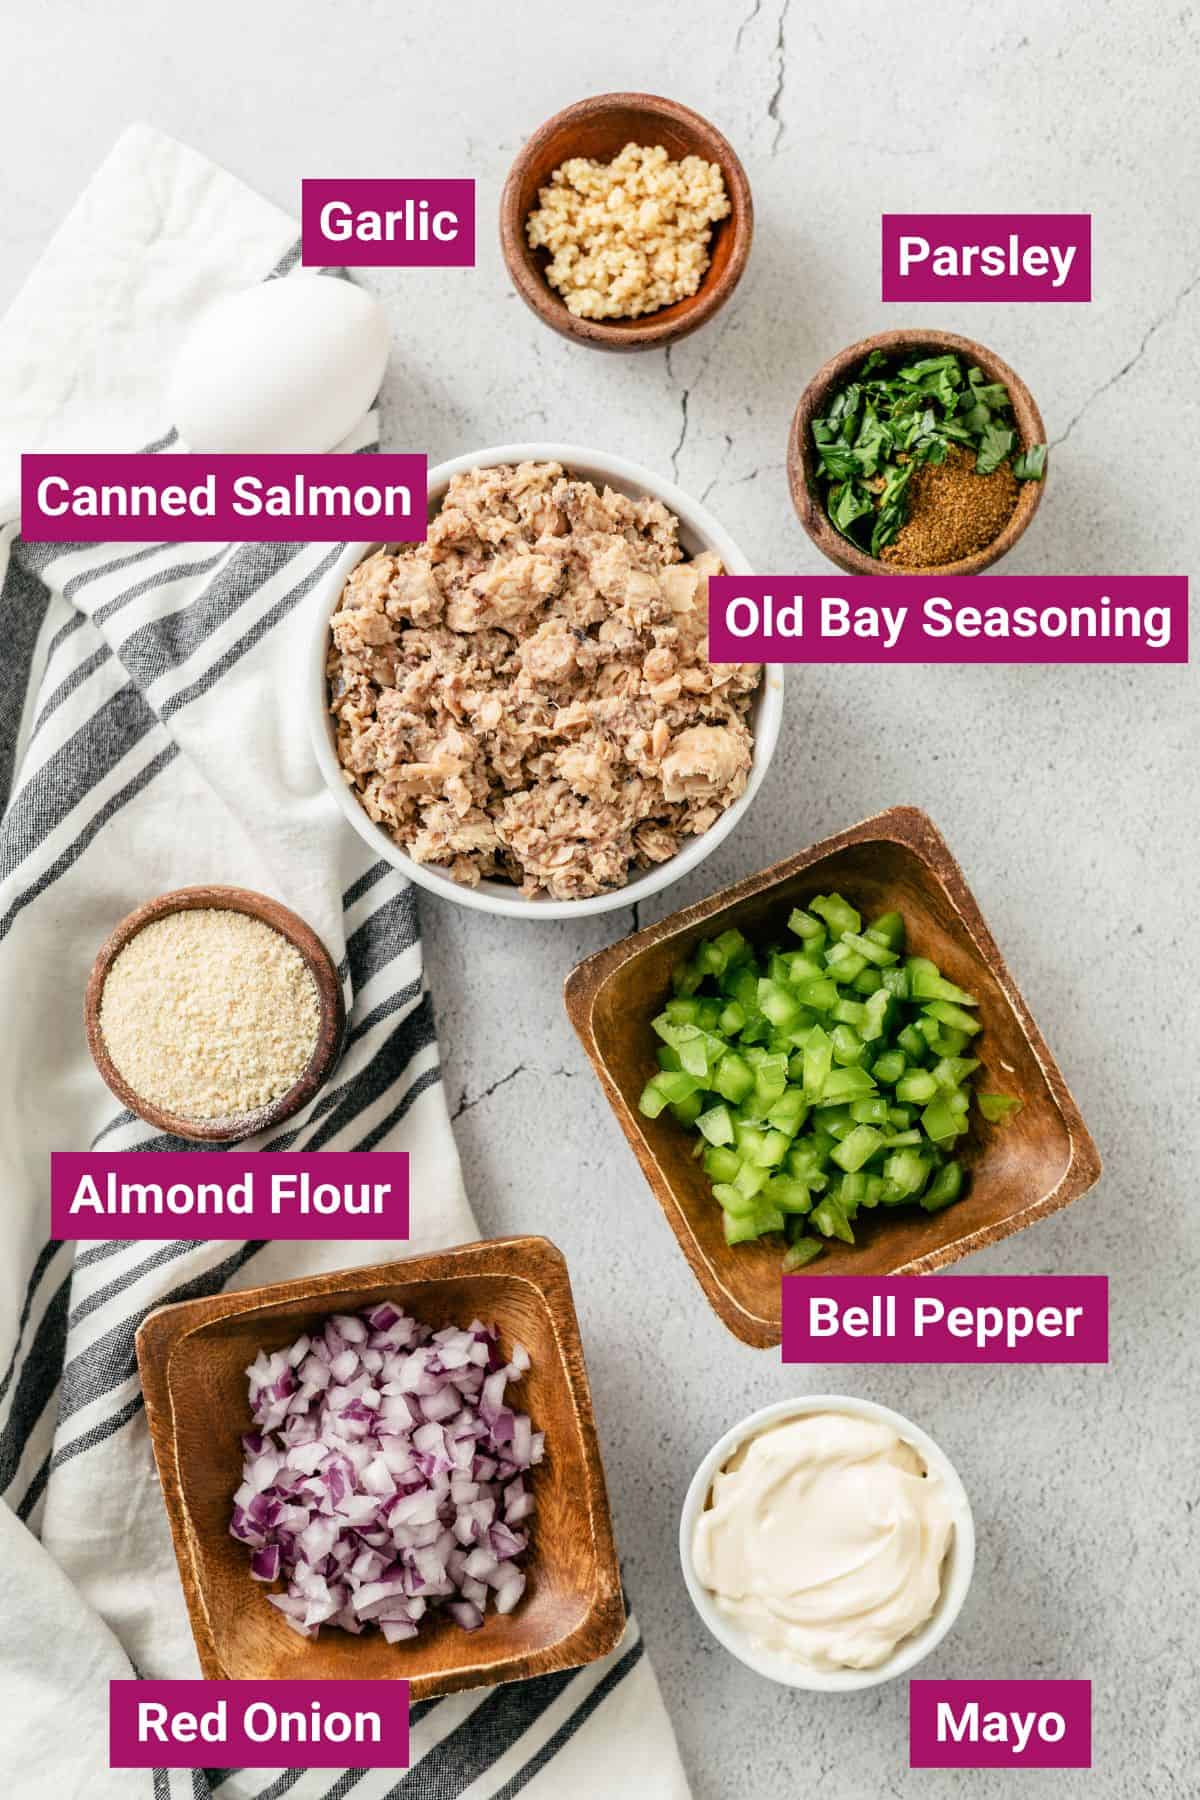 ingredients needed to make salmon patties in the air fryer: Parsley, canned salmon, old bay seasoning, almond flour, garlic, mayo, bell pepper, red onion on separate bowls